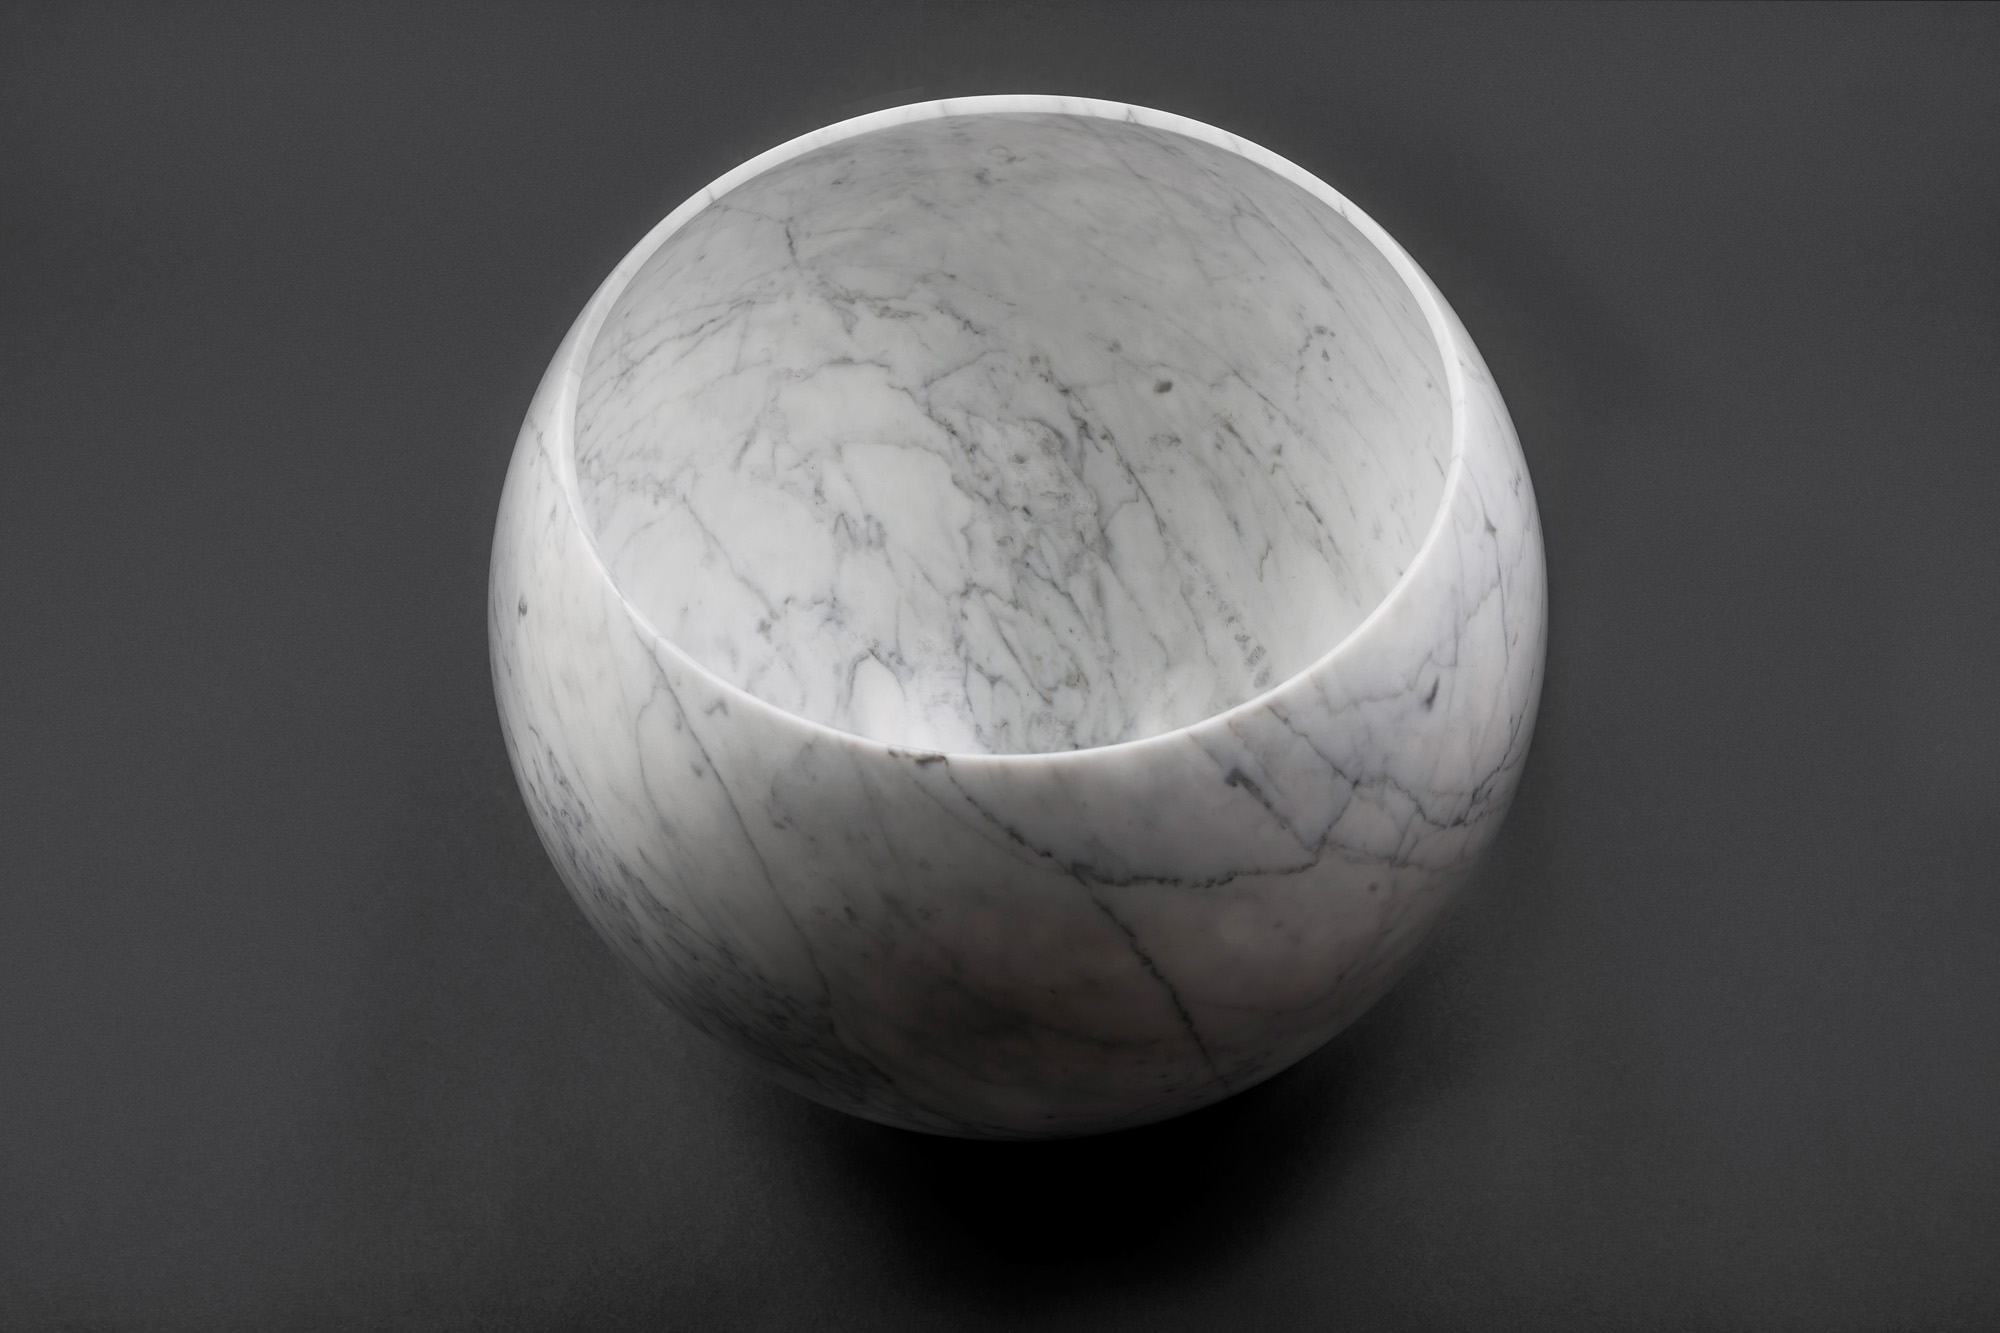 02_Untitled, White Sphere Bowl.